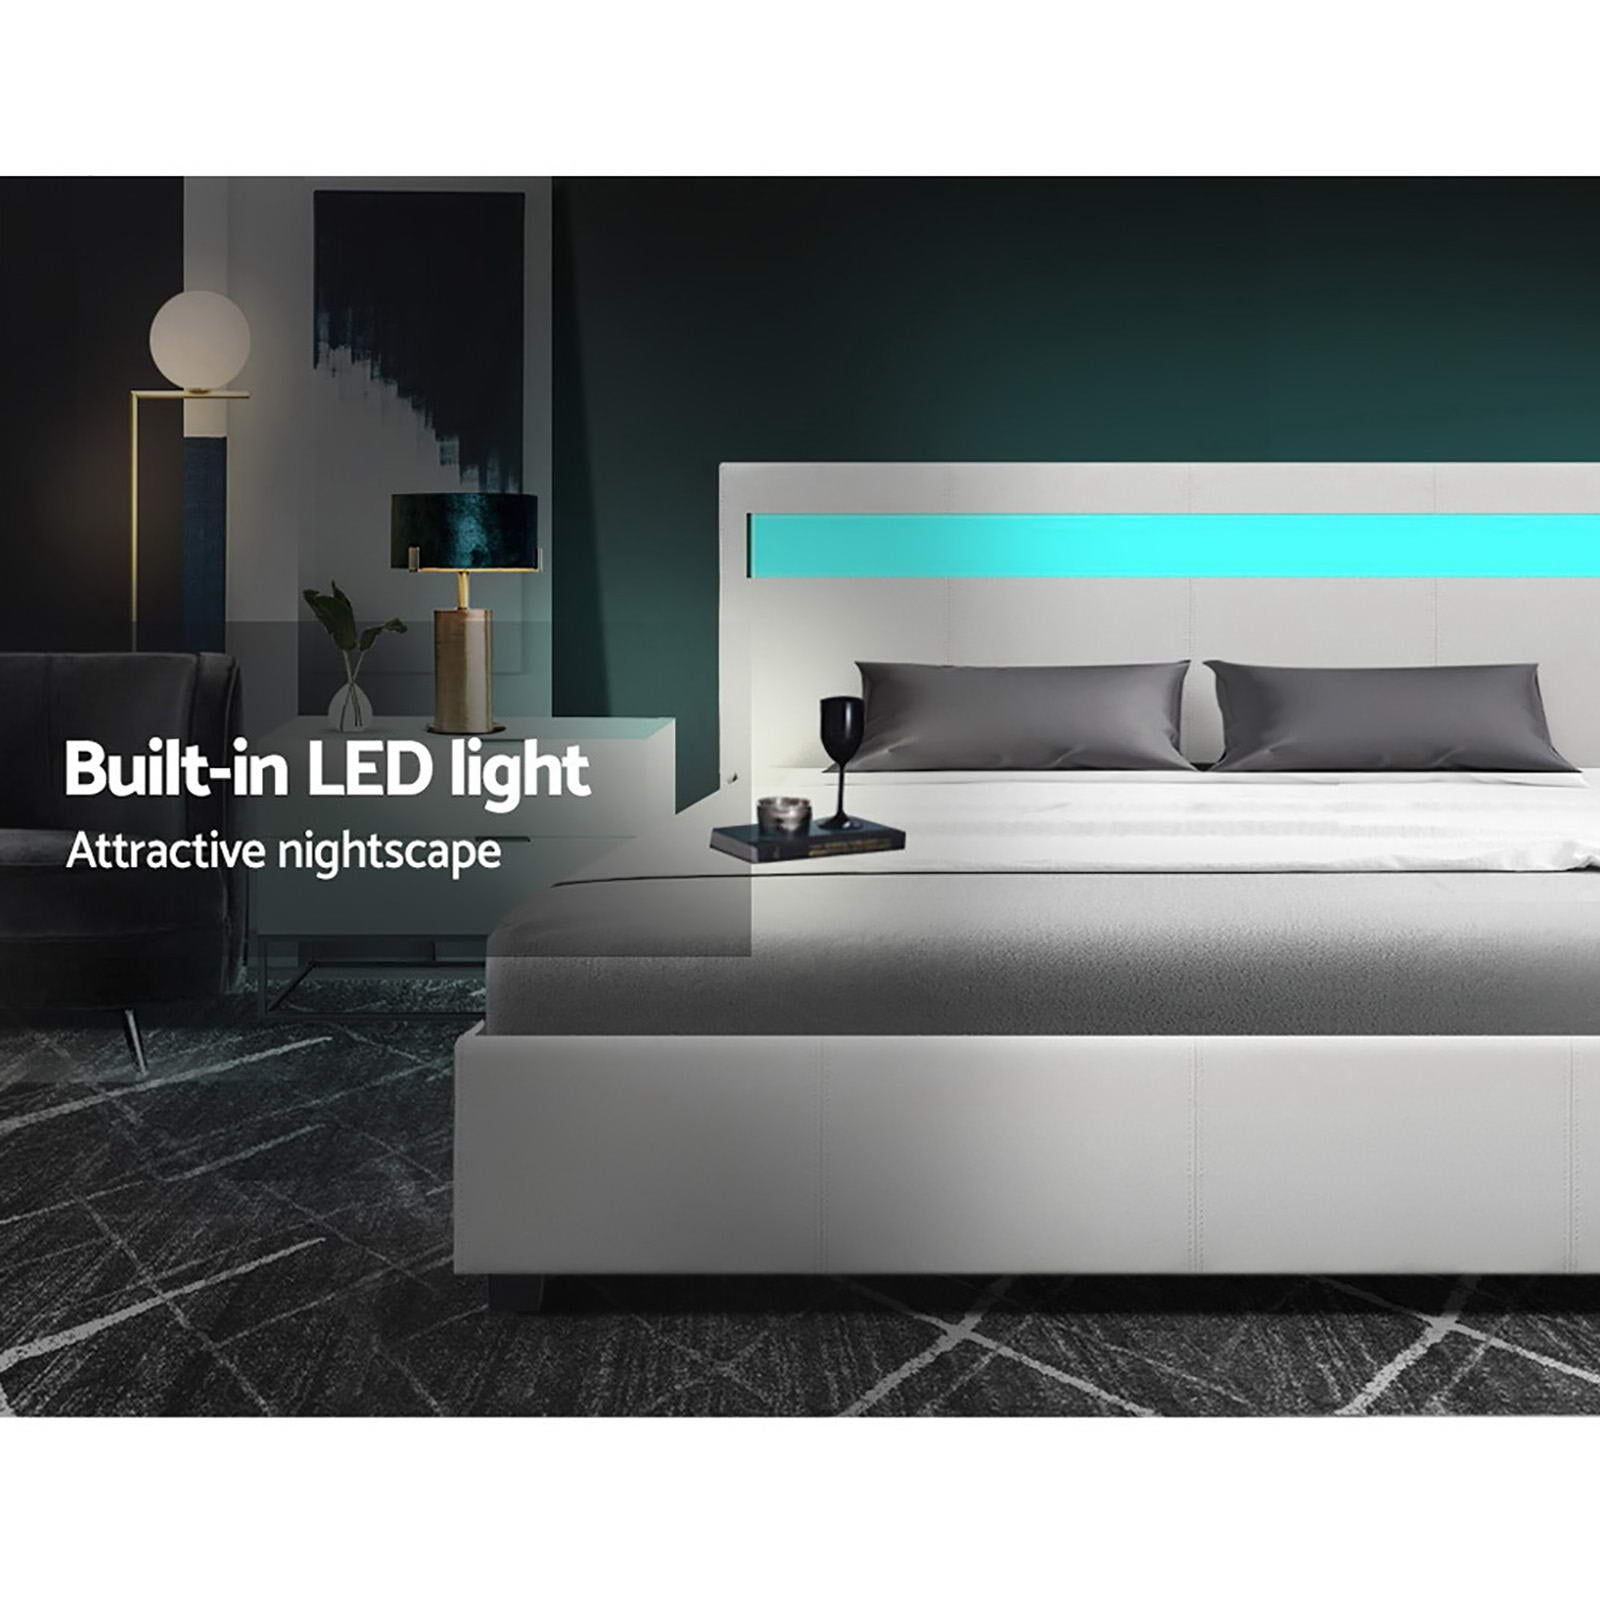 LED Bed Frame Double Full Size Gas Lift Base With Storage White Leather